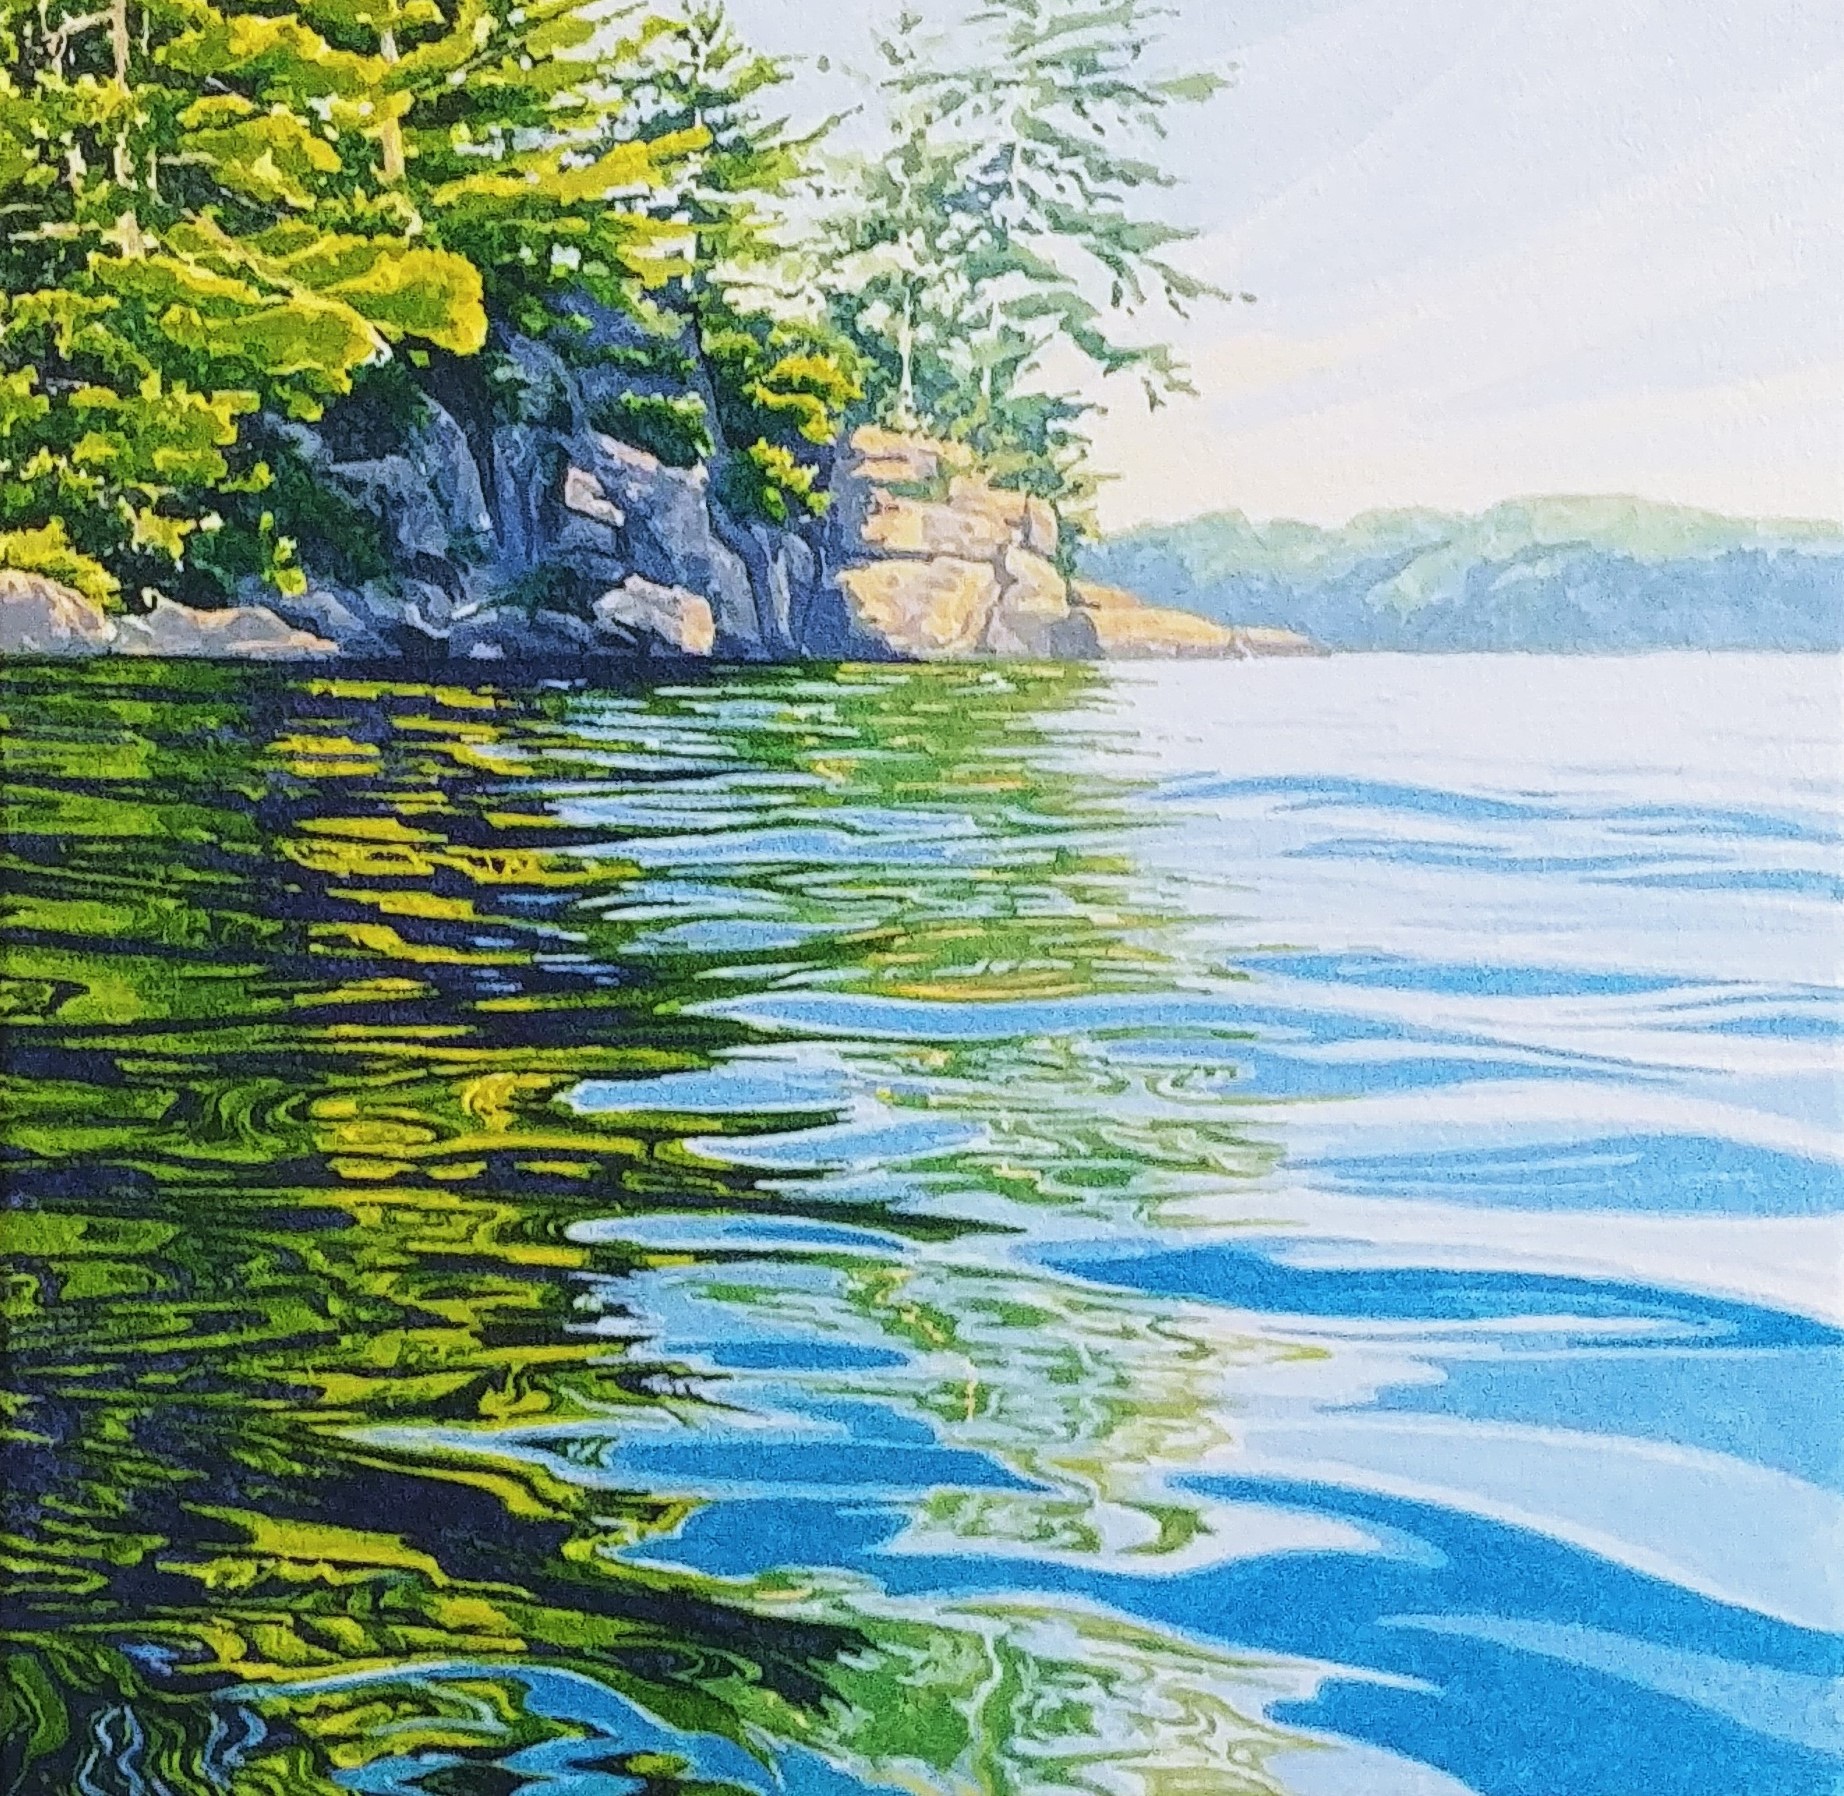 painting of water with trees and rocks in the background